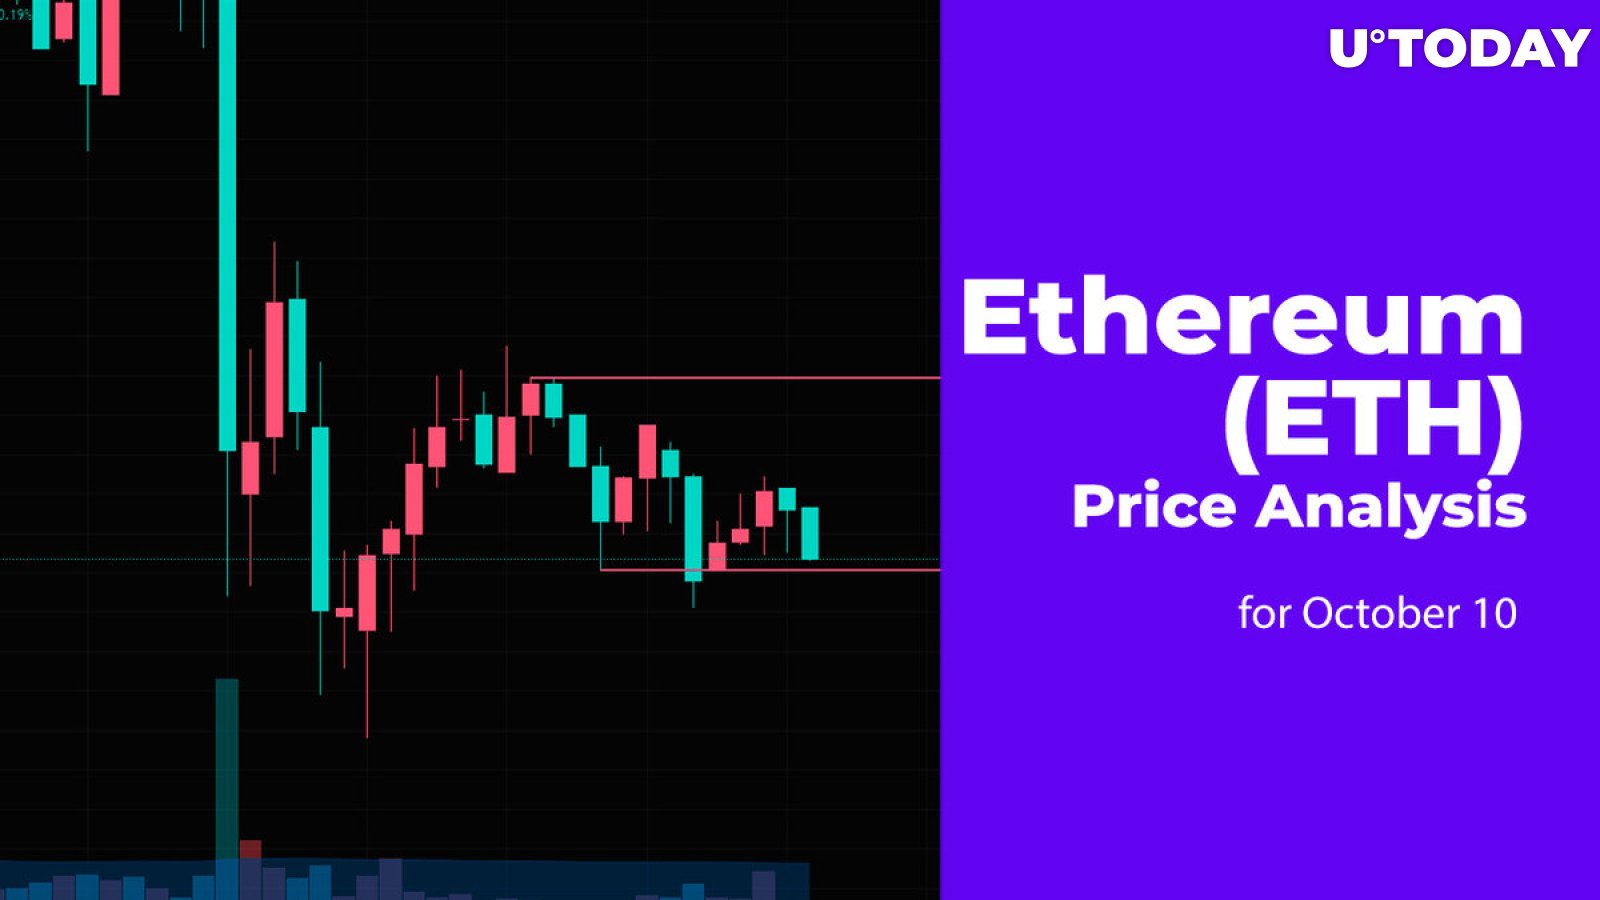 Ethereum (ETH) Price Analysis for October 10